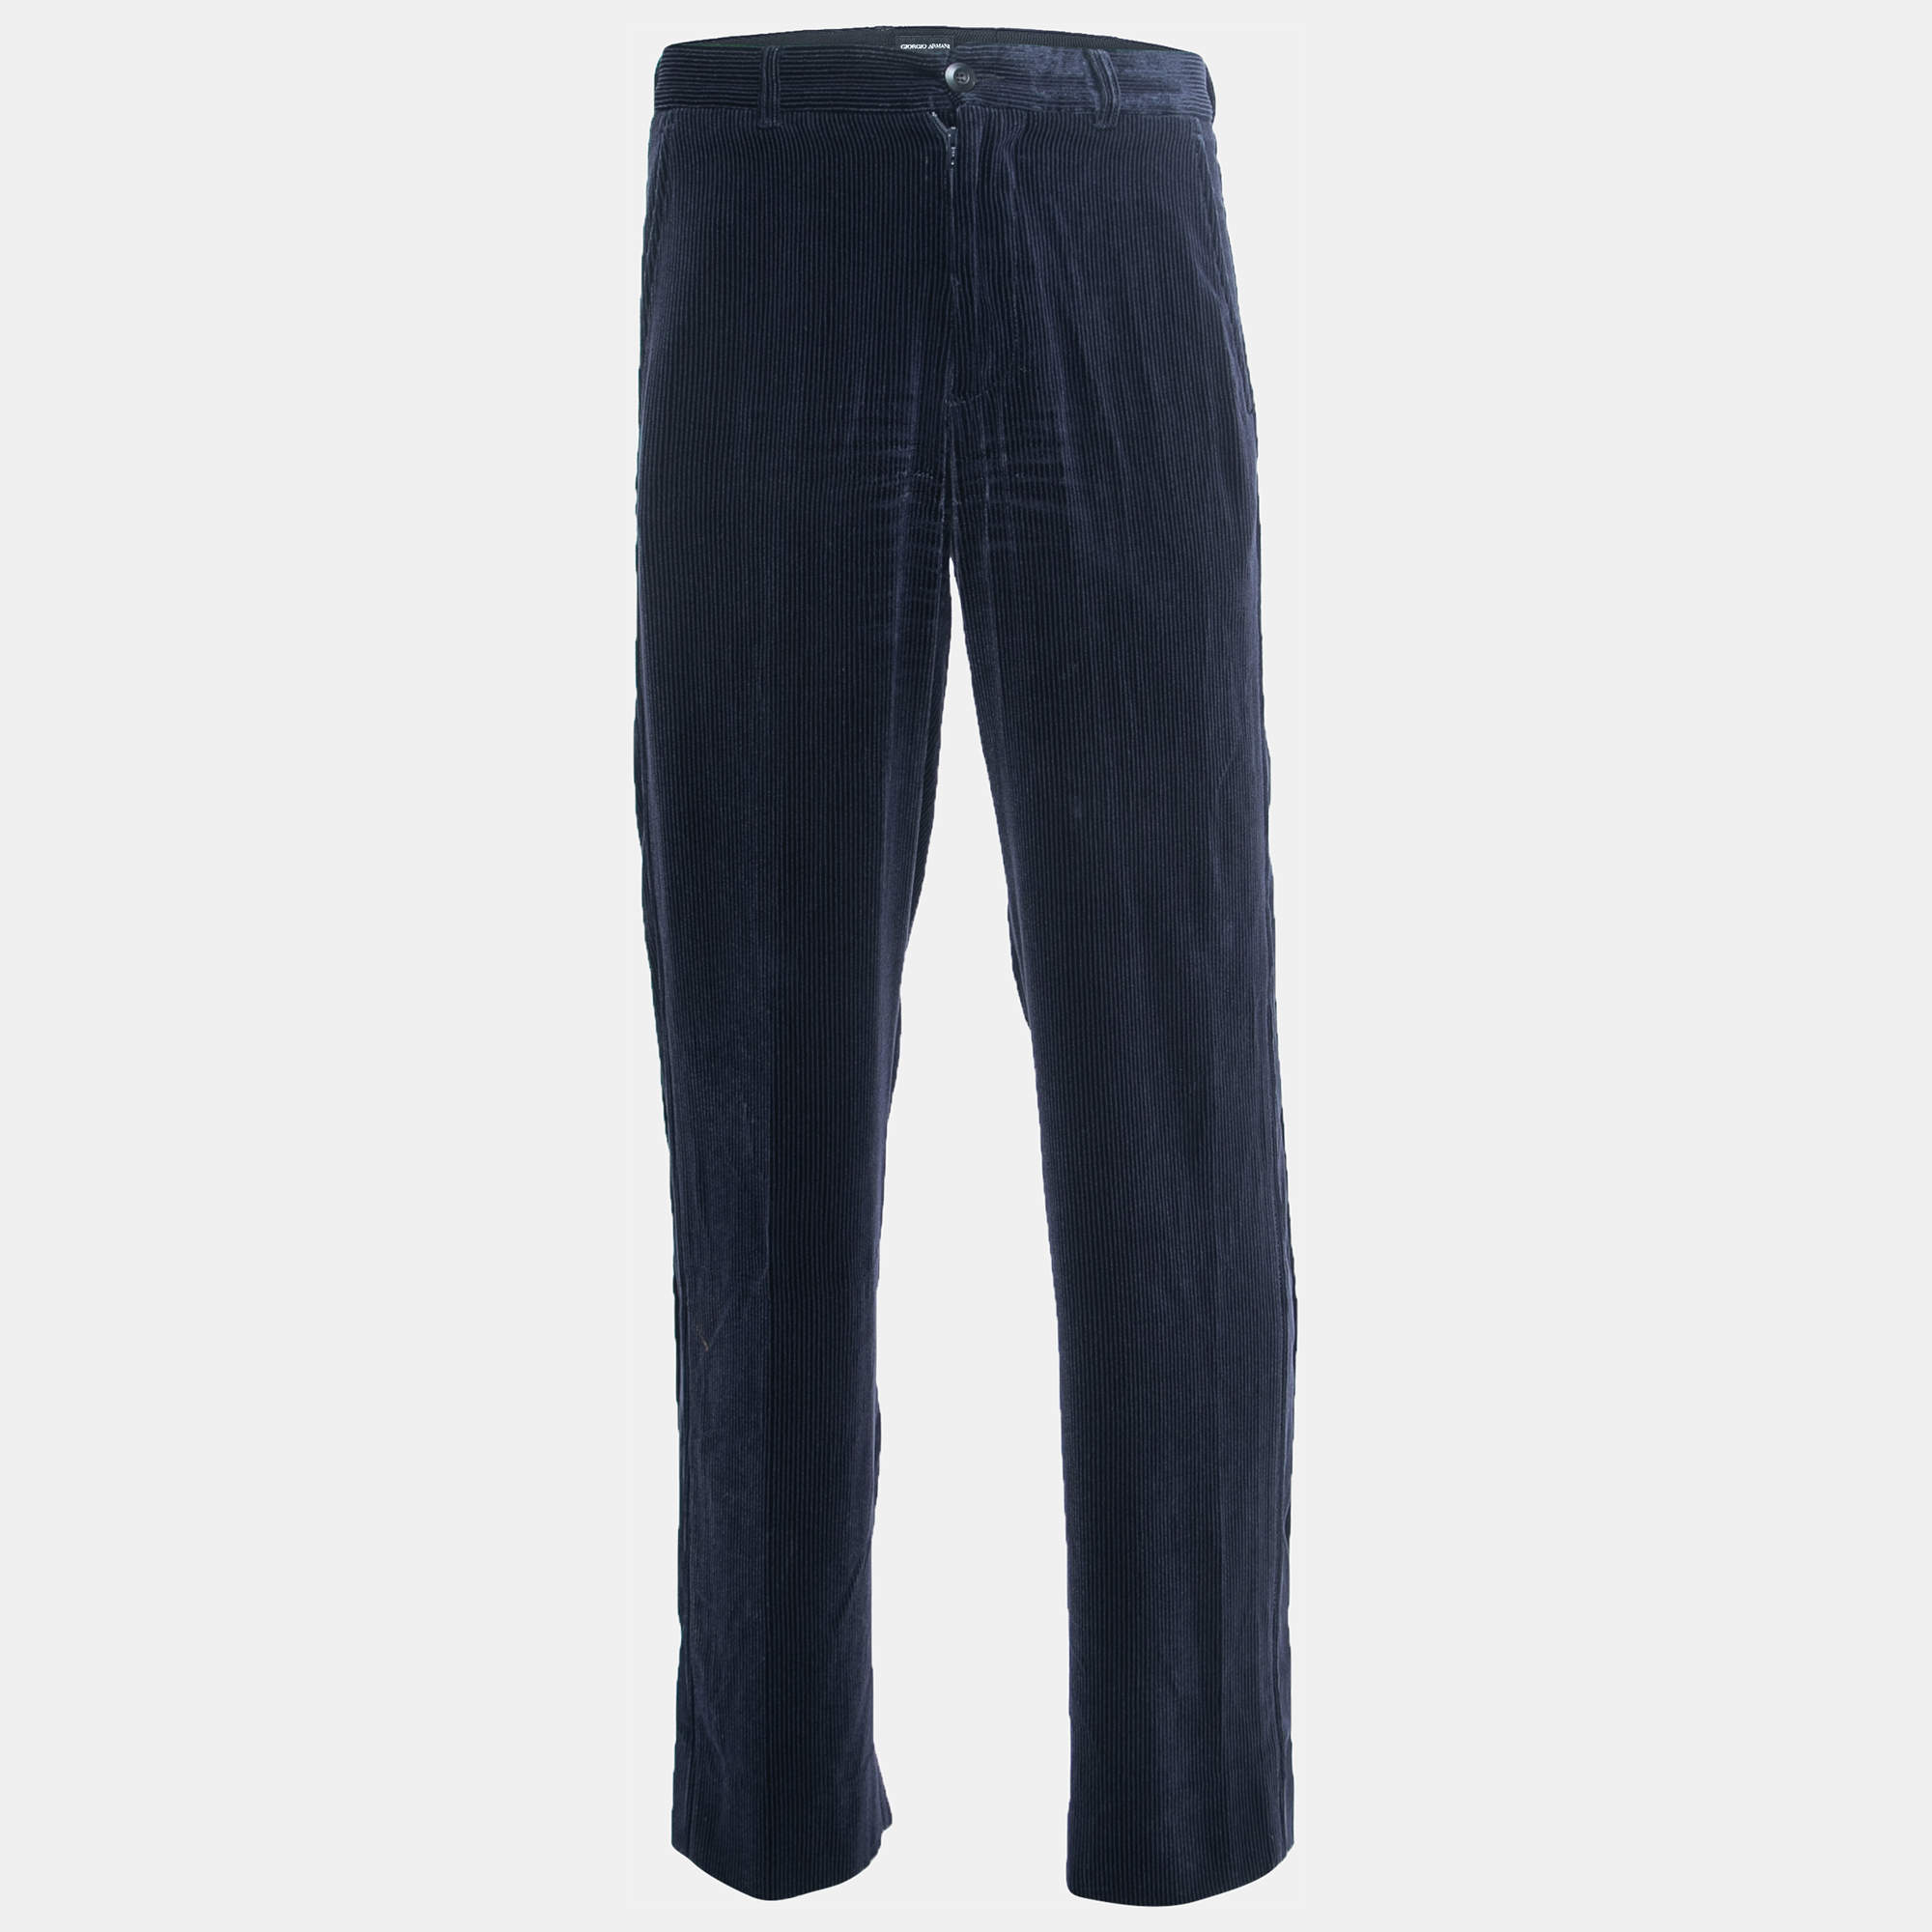 Emporio Armani Grey Flat-Front Wool Trousers for Men Online India at  Darveys.com